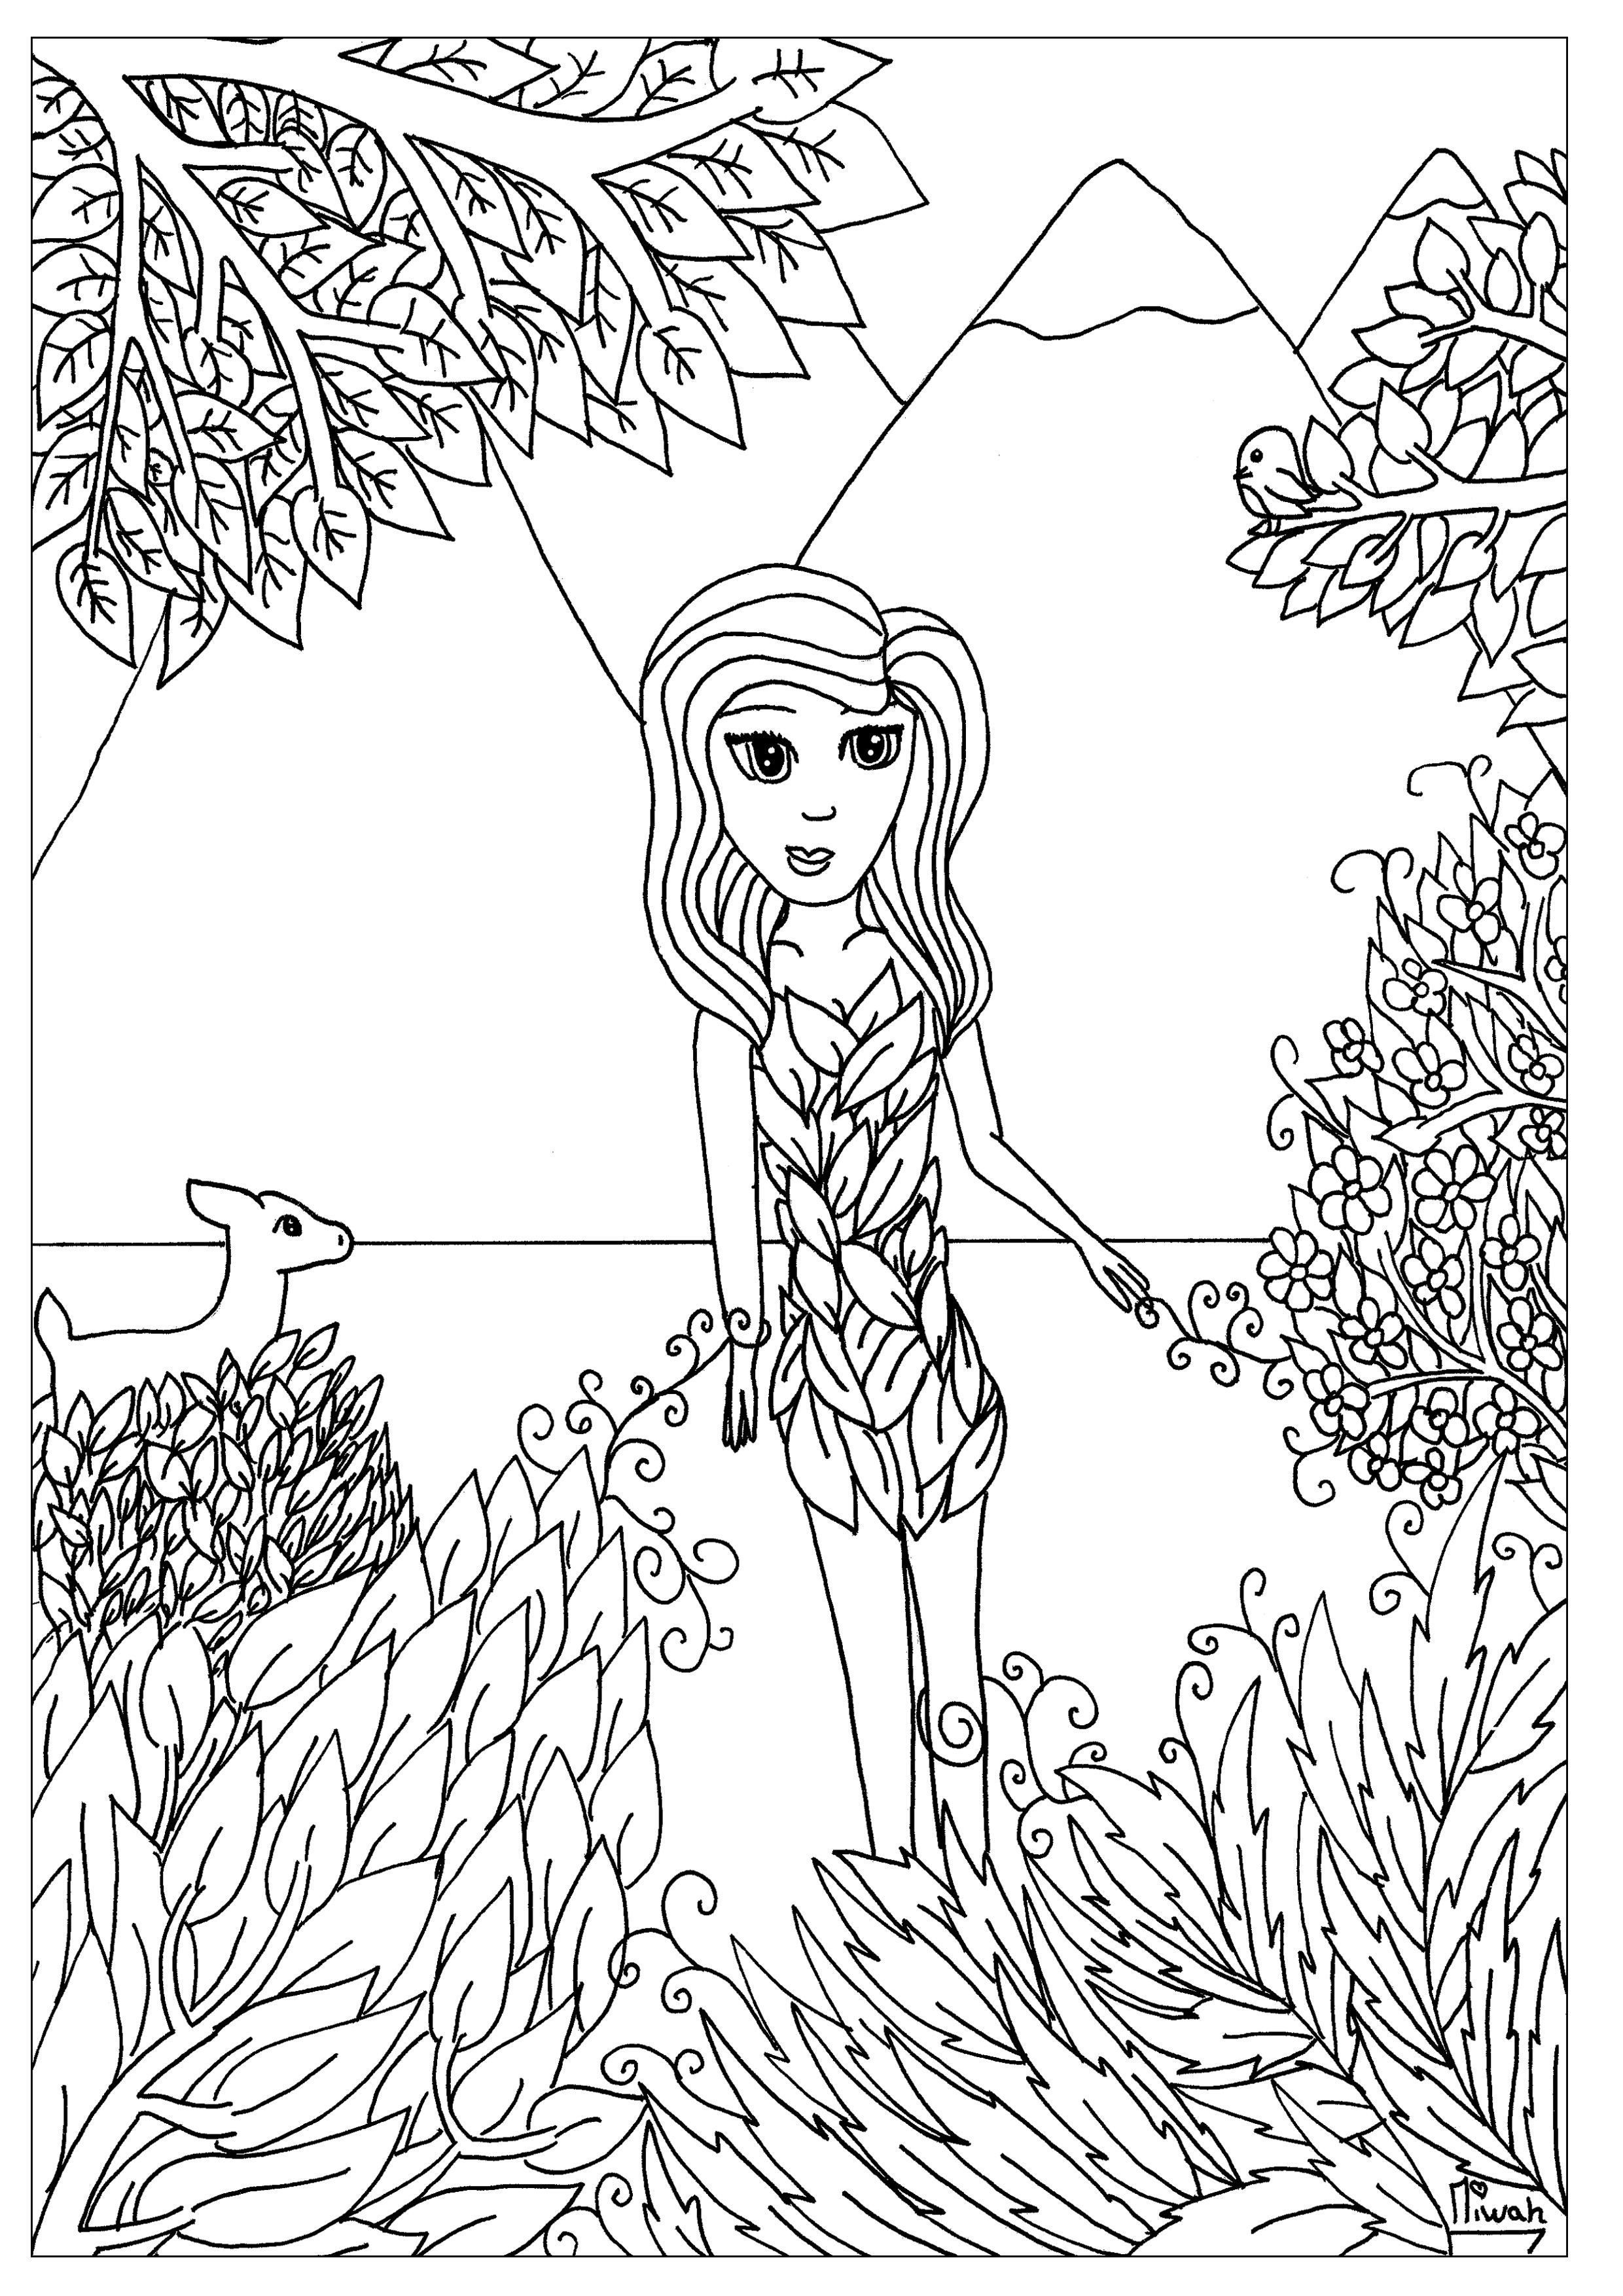 Flower girl - Anti stress Adult Coloring Pages - Page 2